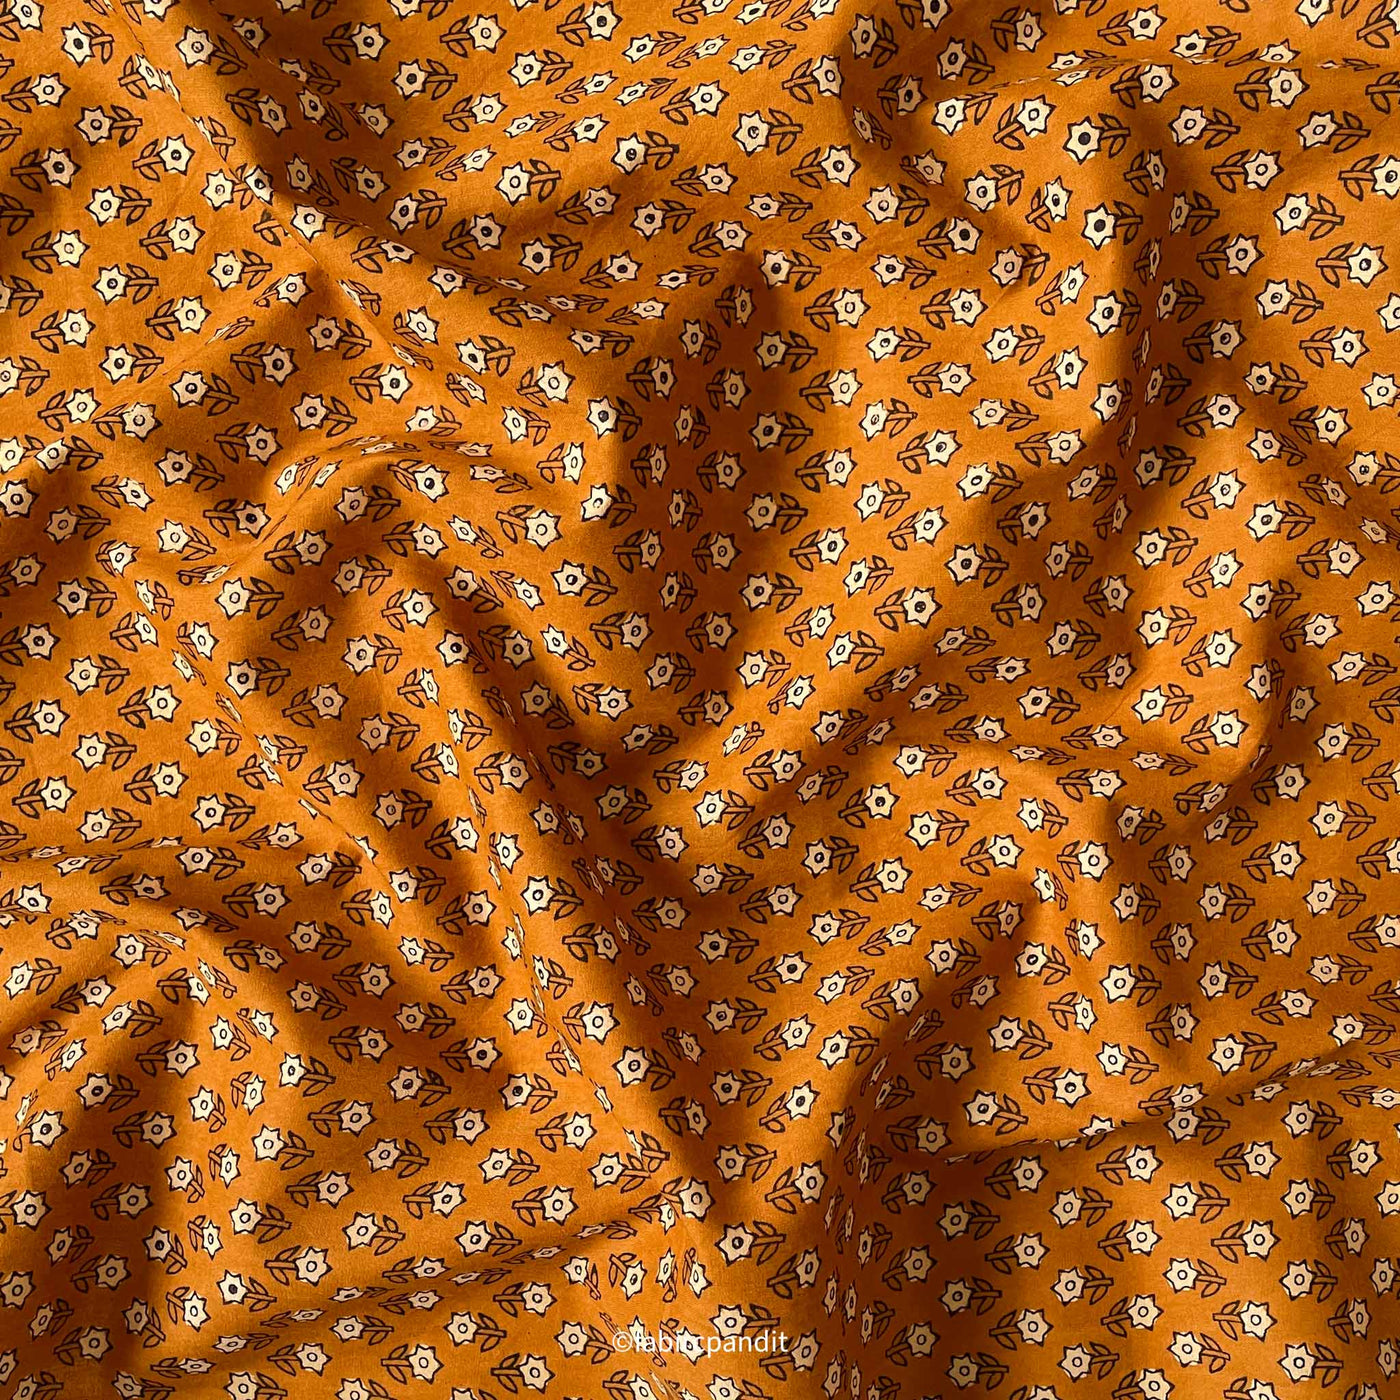 Fabric Pandit Fabric Dusty Mustard Geometric Floral Hand Block Printed Pure Cotton Fabric (Width 43 inches)